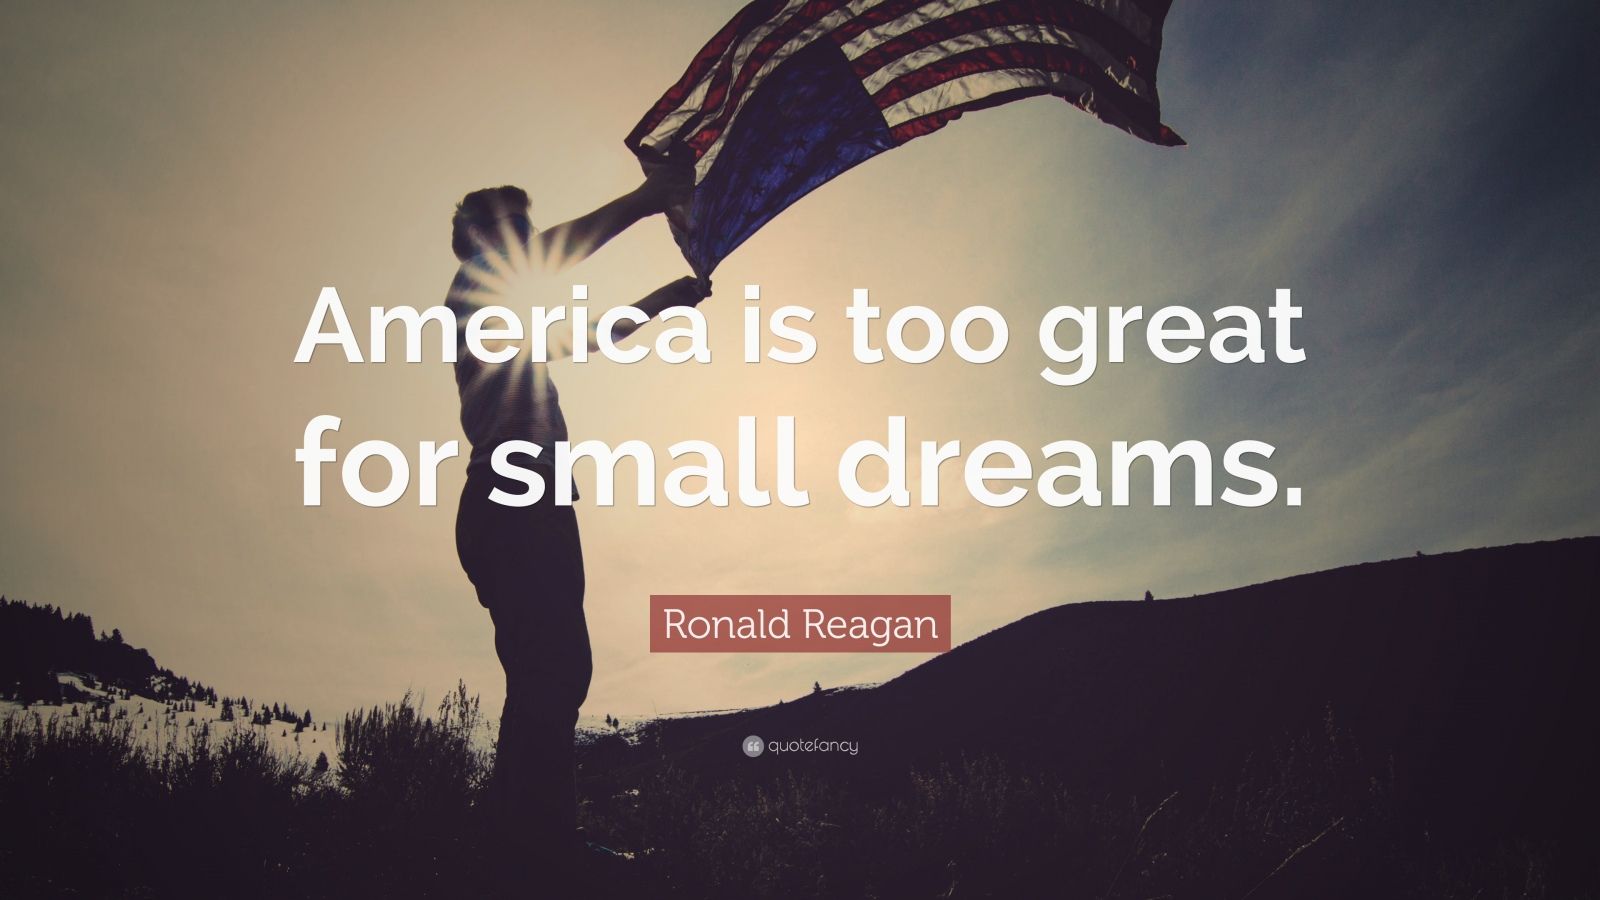 28679 Ronald Reagan Quote America is too great for small dreams